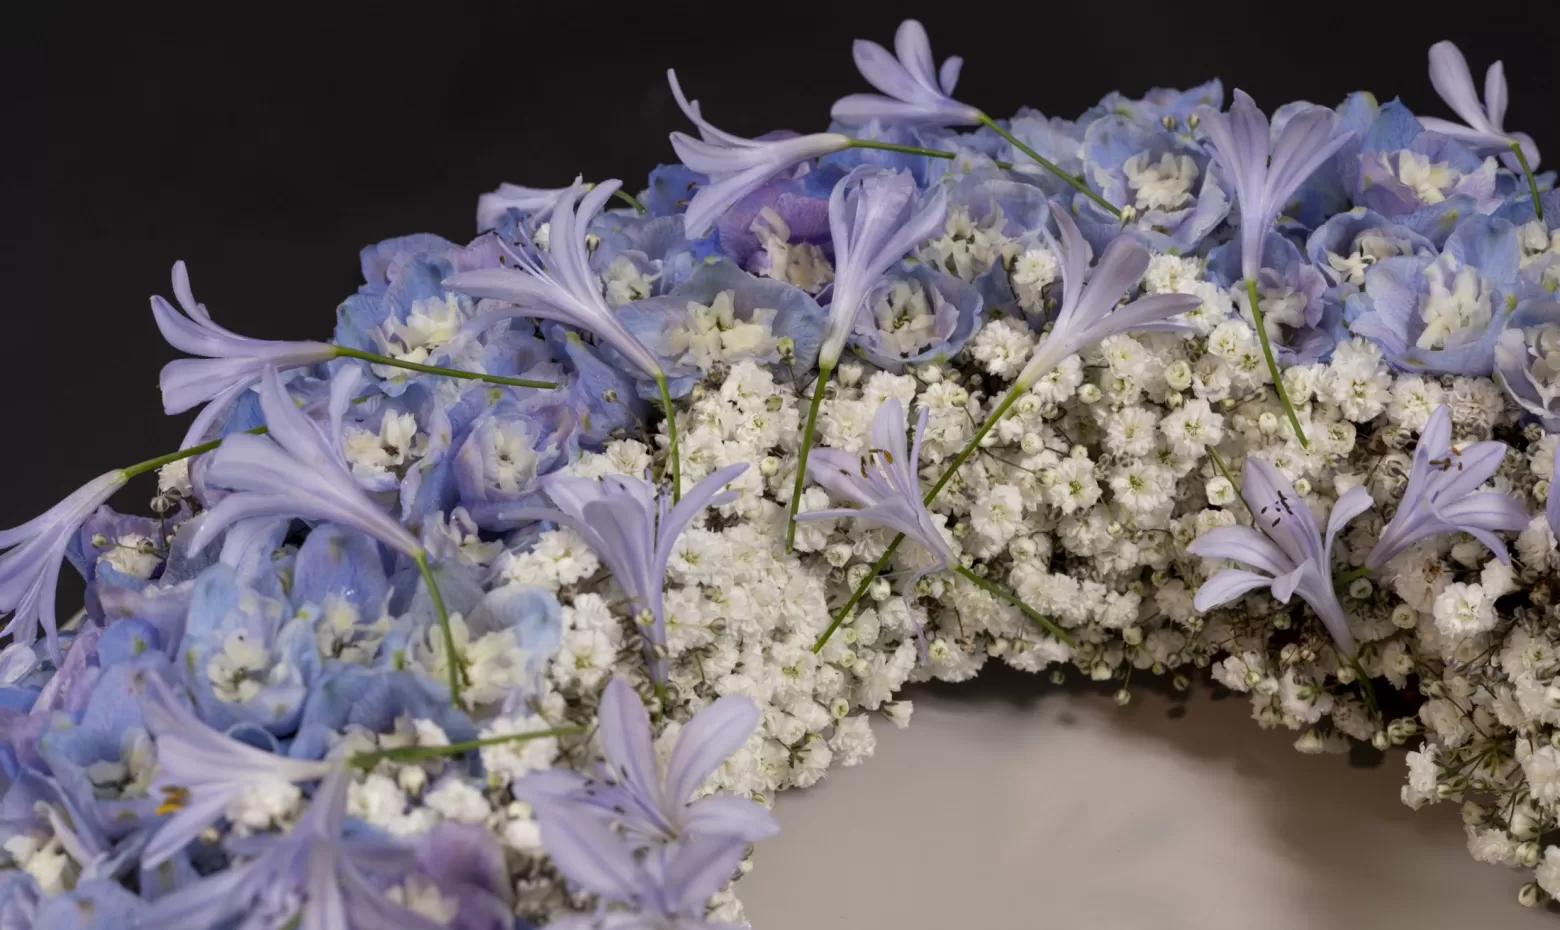 Funeral wreath with Delphinium, Agapanthus and Gypsophila